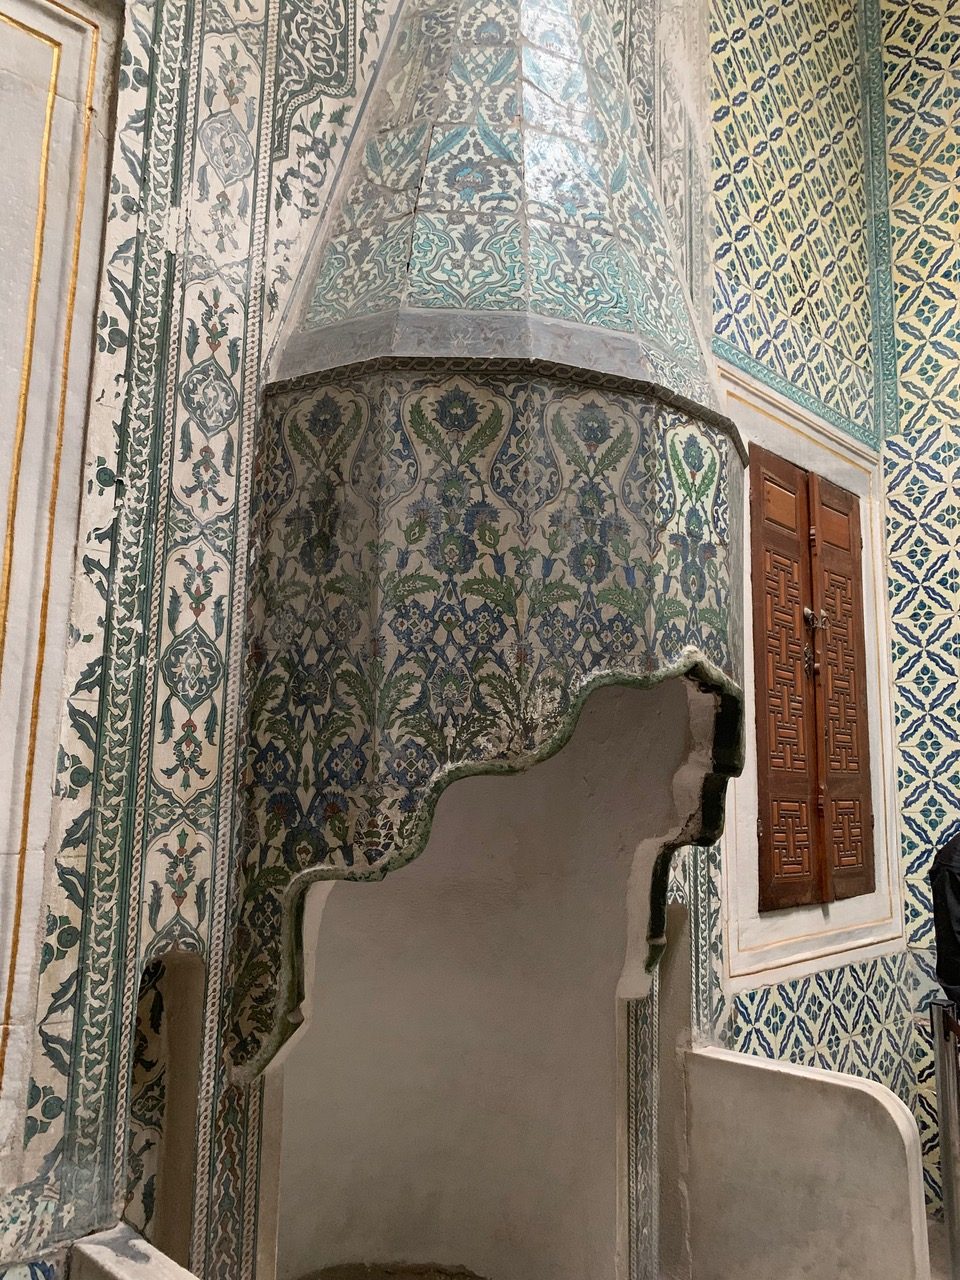 conical chimney inlaid with blue and green designs